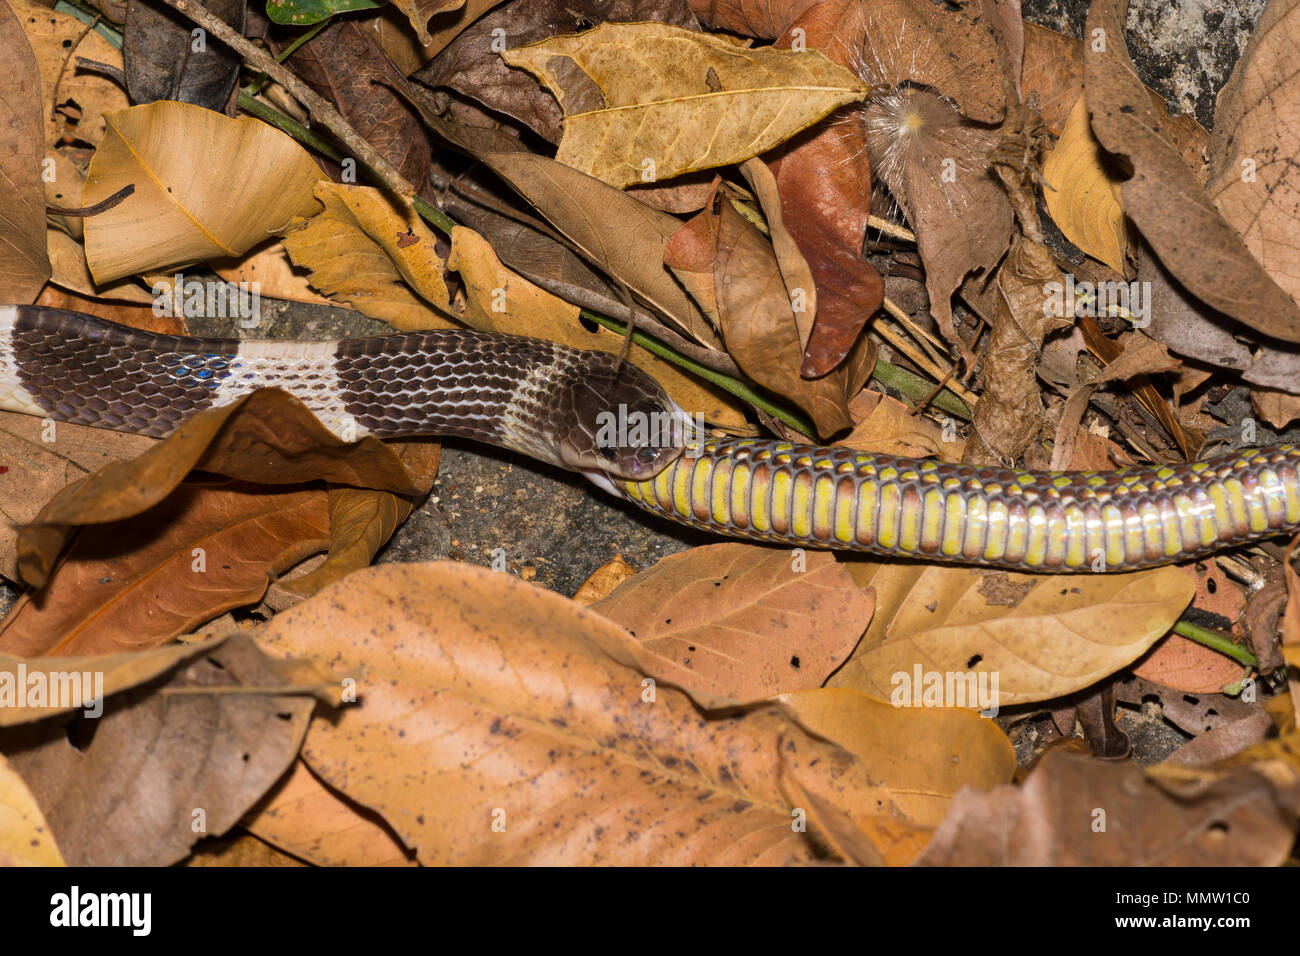 Blue or Malayan Krait (Bungarus candidus) eating a Brown Spotted Pit Viper (Trimeresurus venustus) Thailand, one of the world's most venomous snakes. Stock Photo